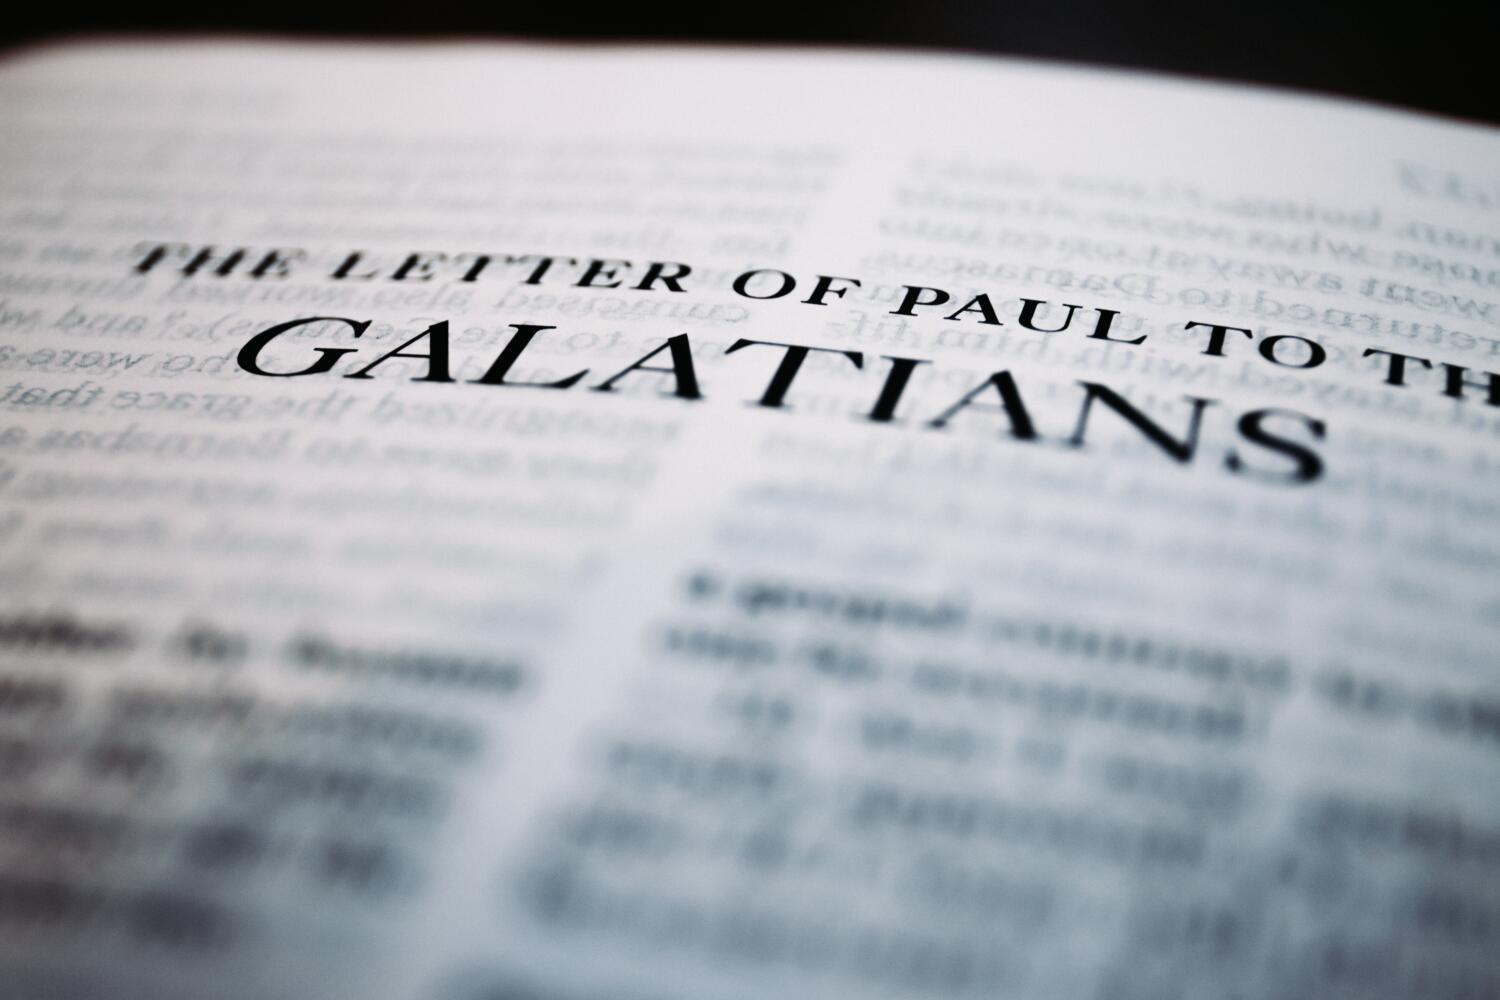 The book of Galatians